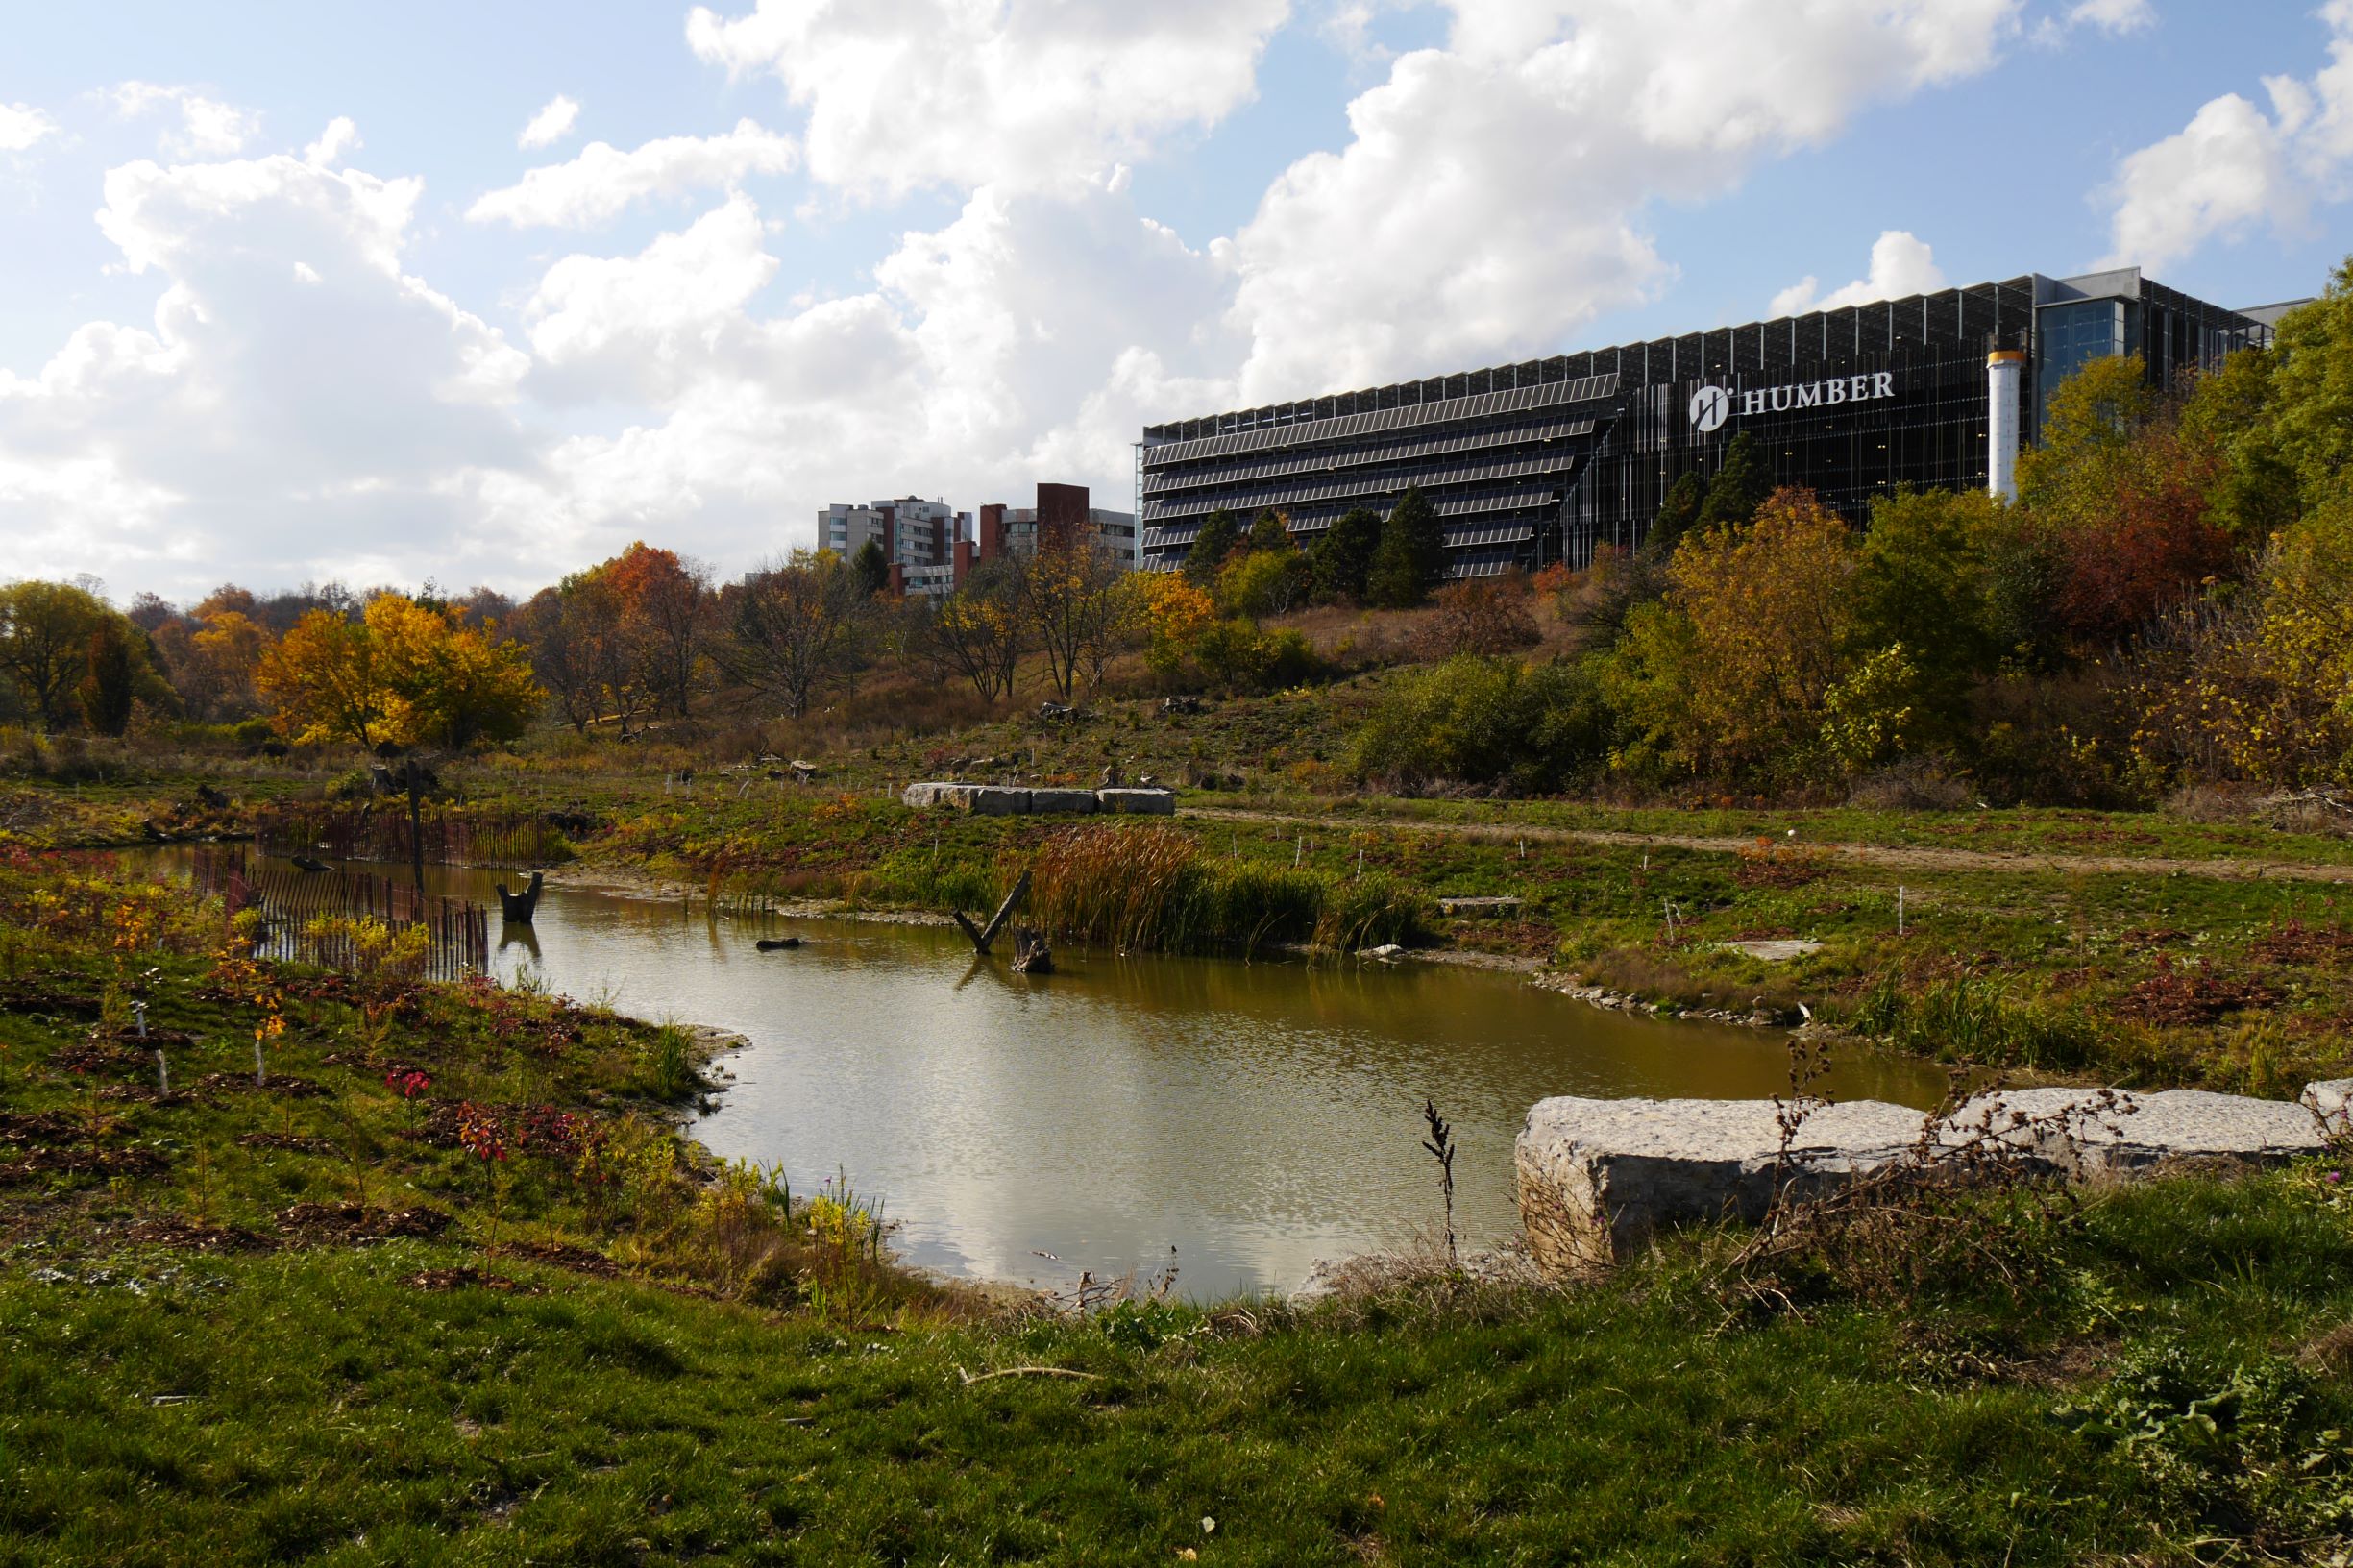 A wetland surrounded by grassy plants, with a view of a Humber College parking garage in the background.